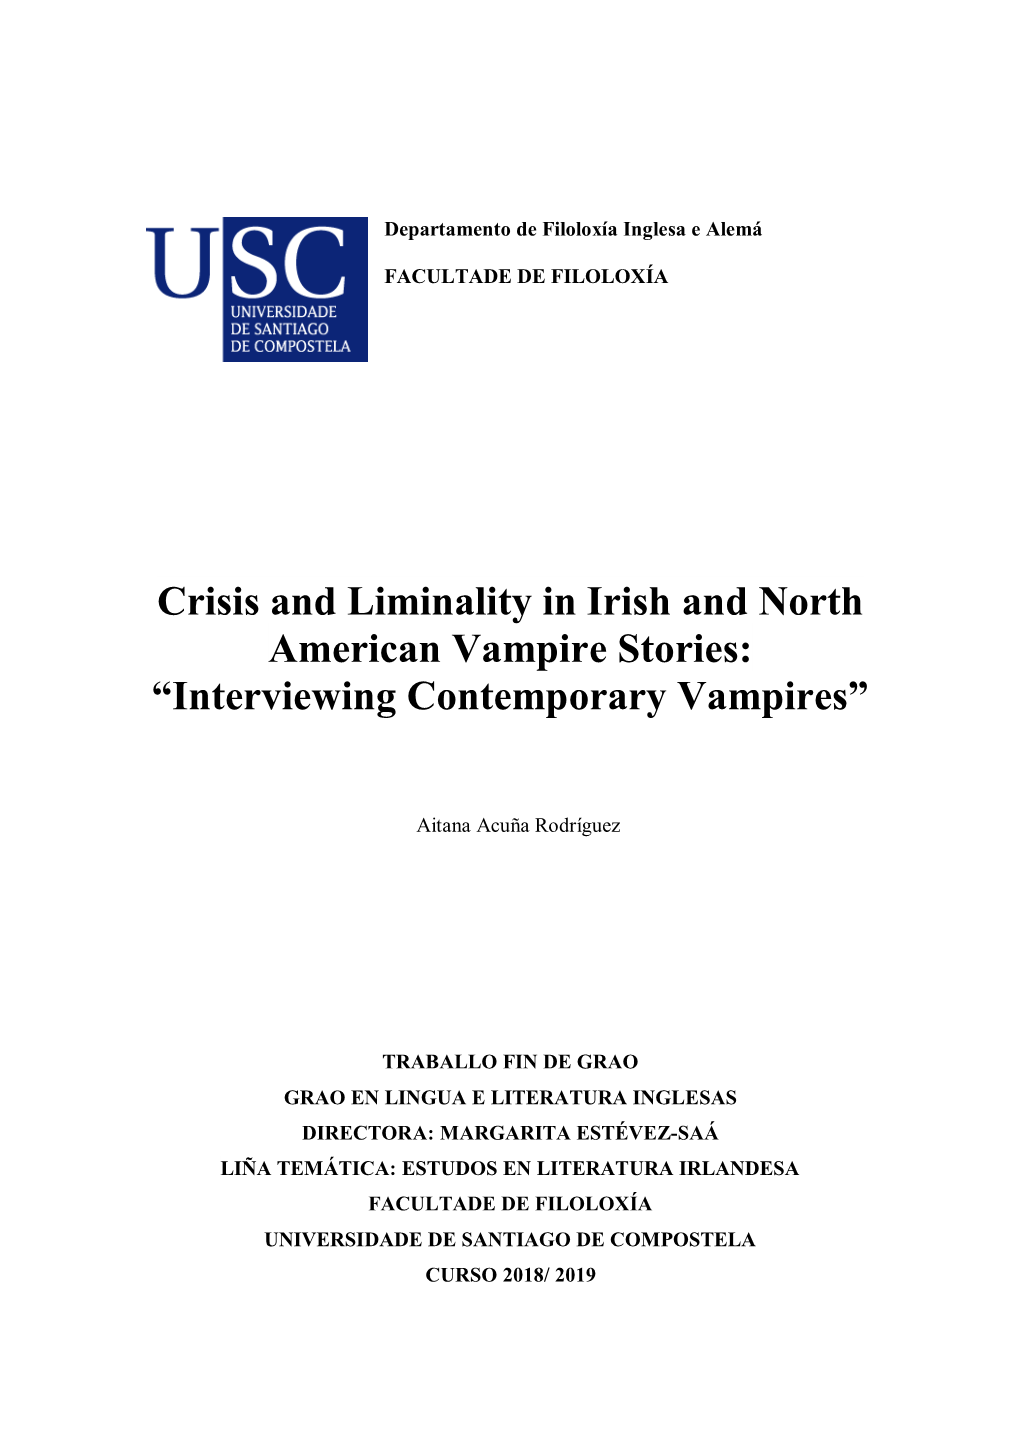 Crisis and Liminality in Irish and North American Vampire Stories: “Interviewing Contemporary Vampires”